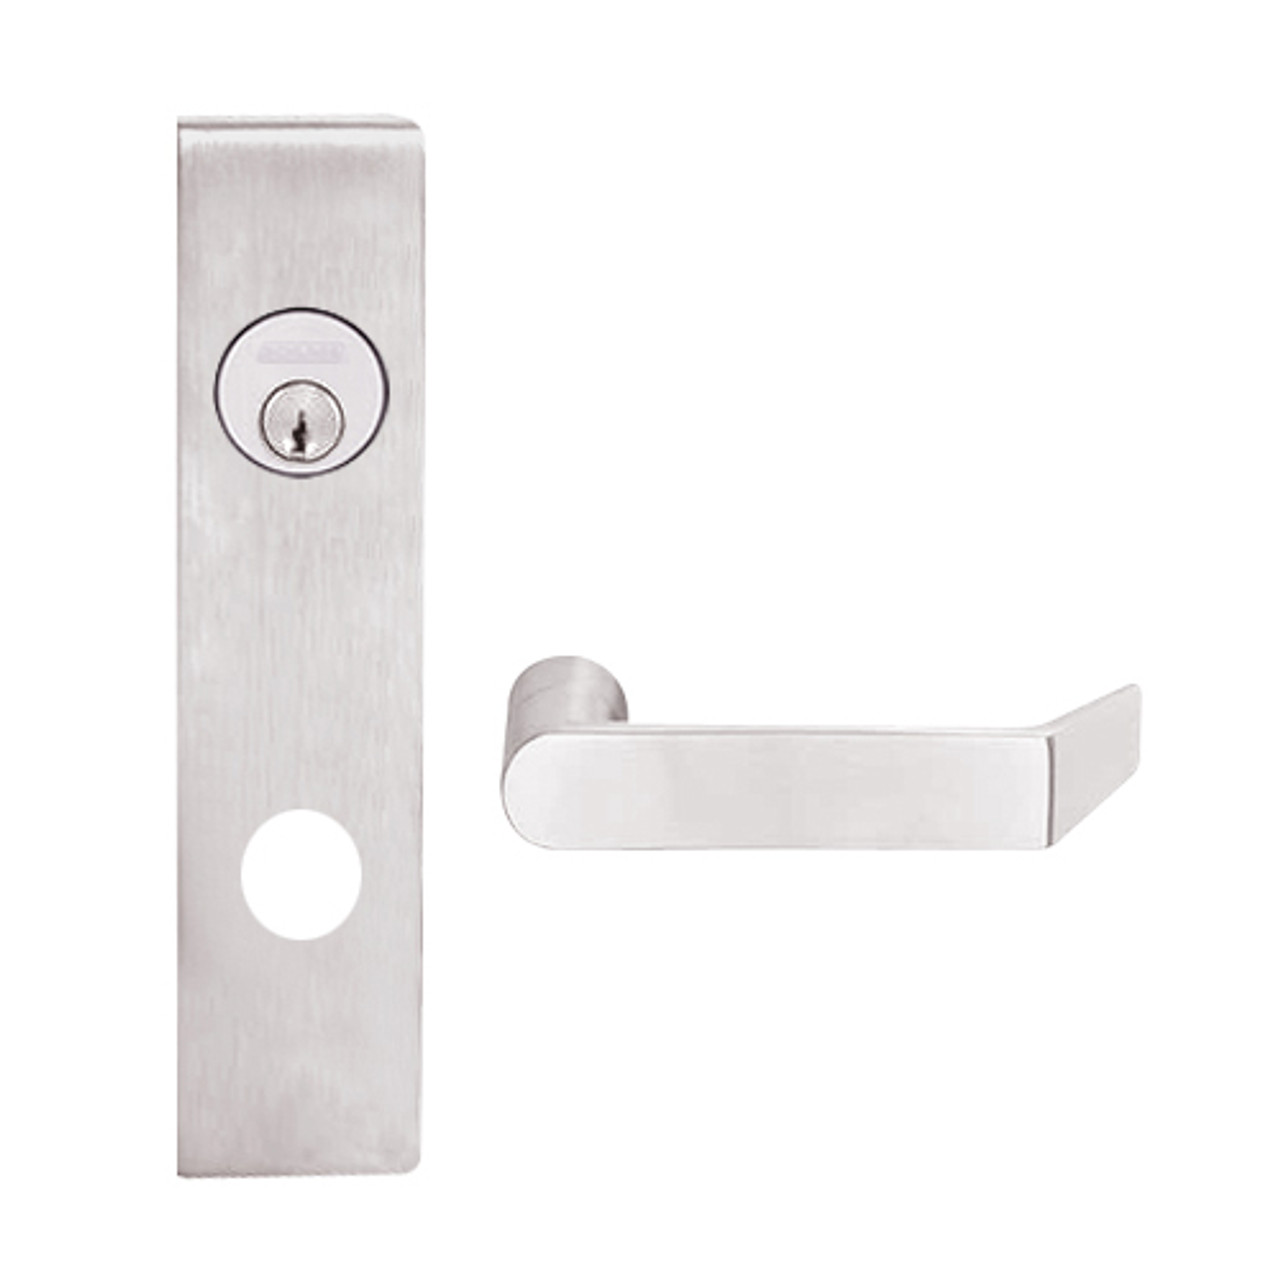 L9026L-06L-629 Schlage L Series Less Cylinder Exit Lock with Cylinder Commercial Mortise Lock with 06 Cast Lever Design in Bright Stainless Steel